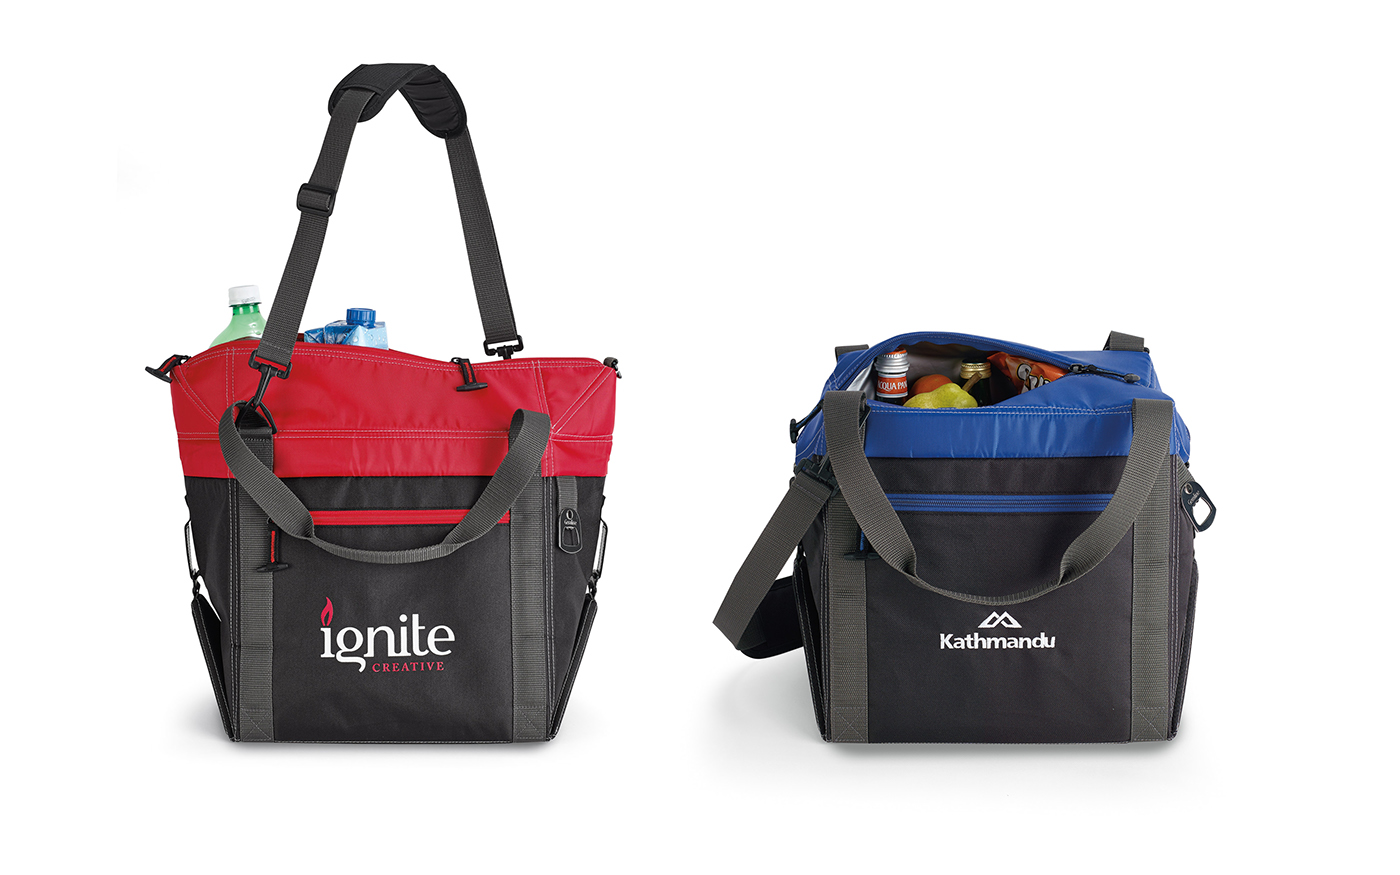 Gemline cooler Convertible Cooler patented Promotional promotional product